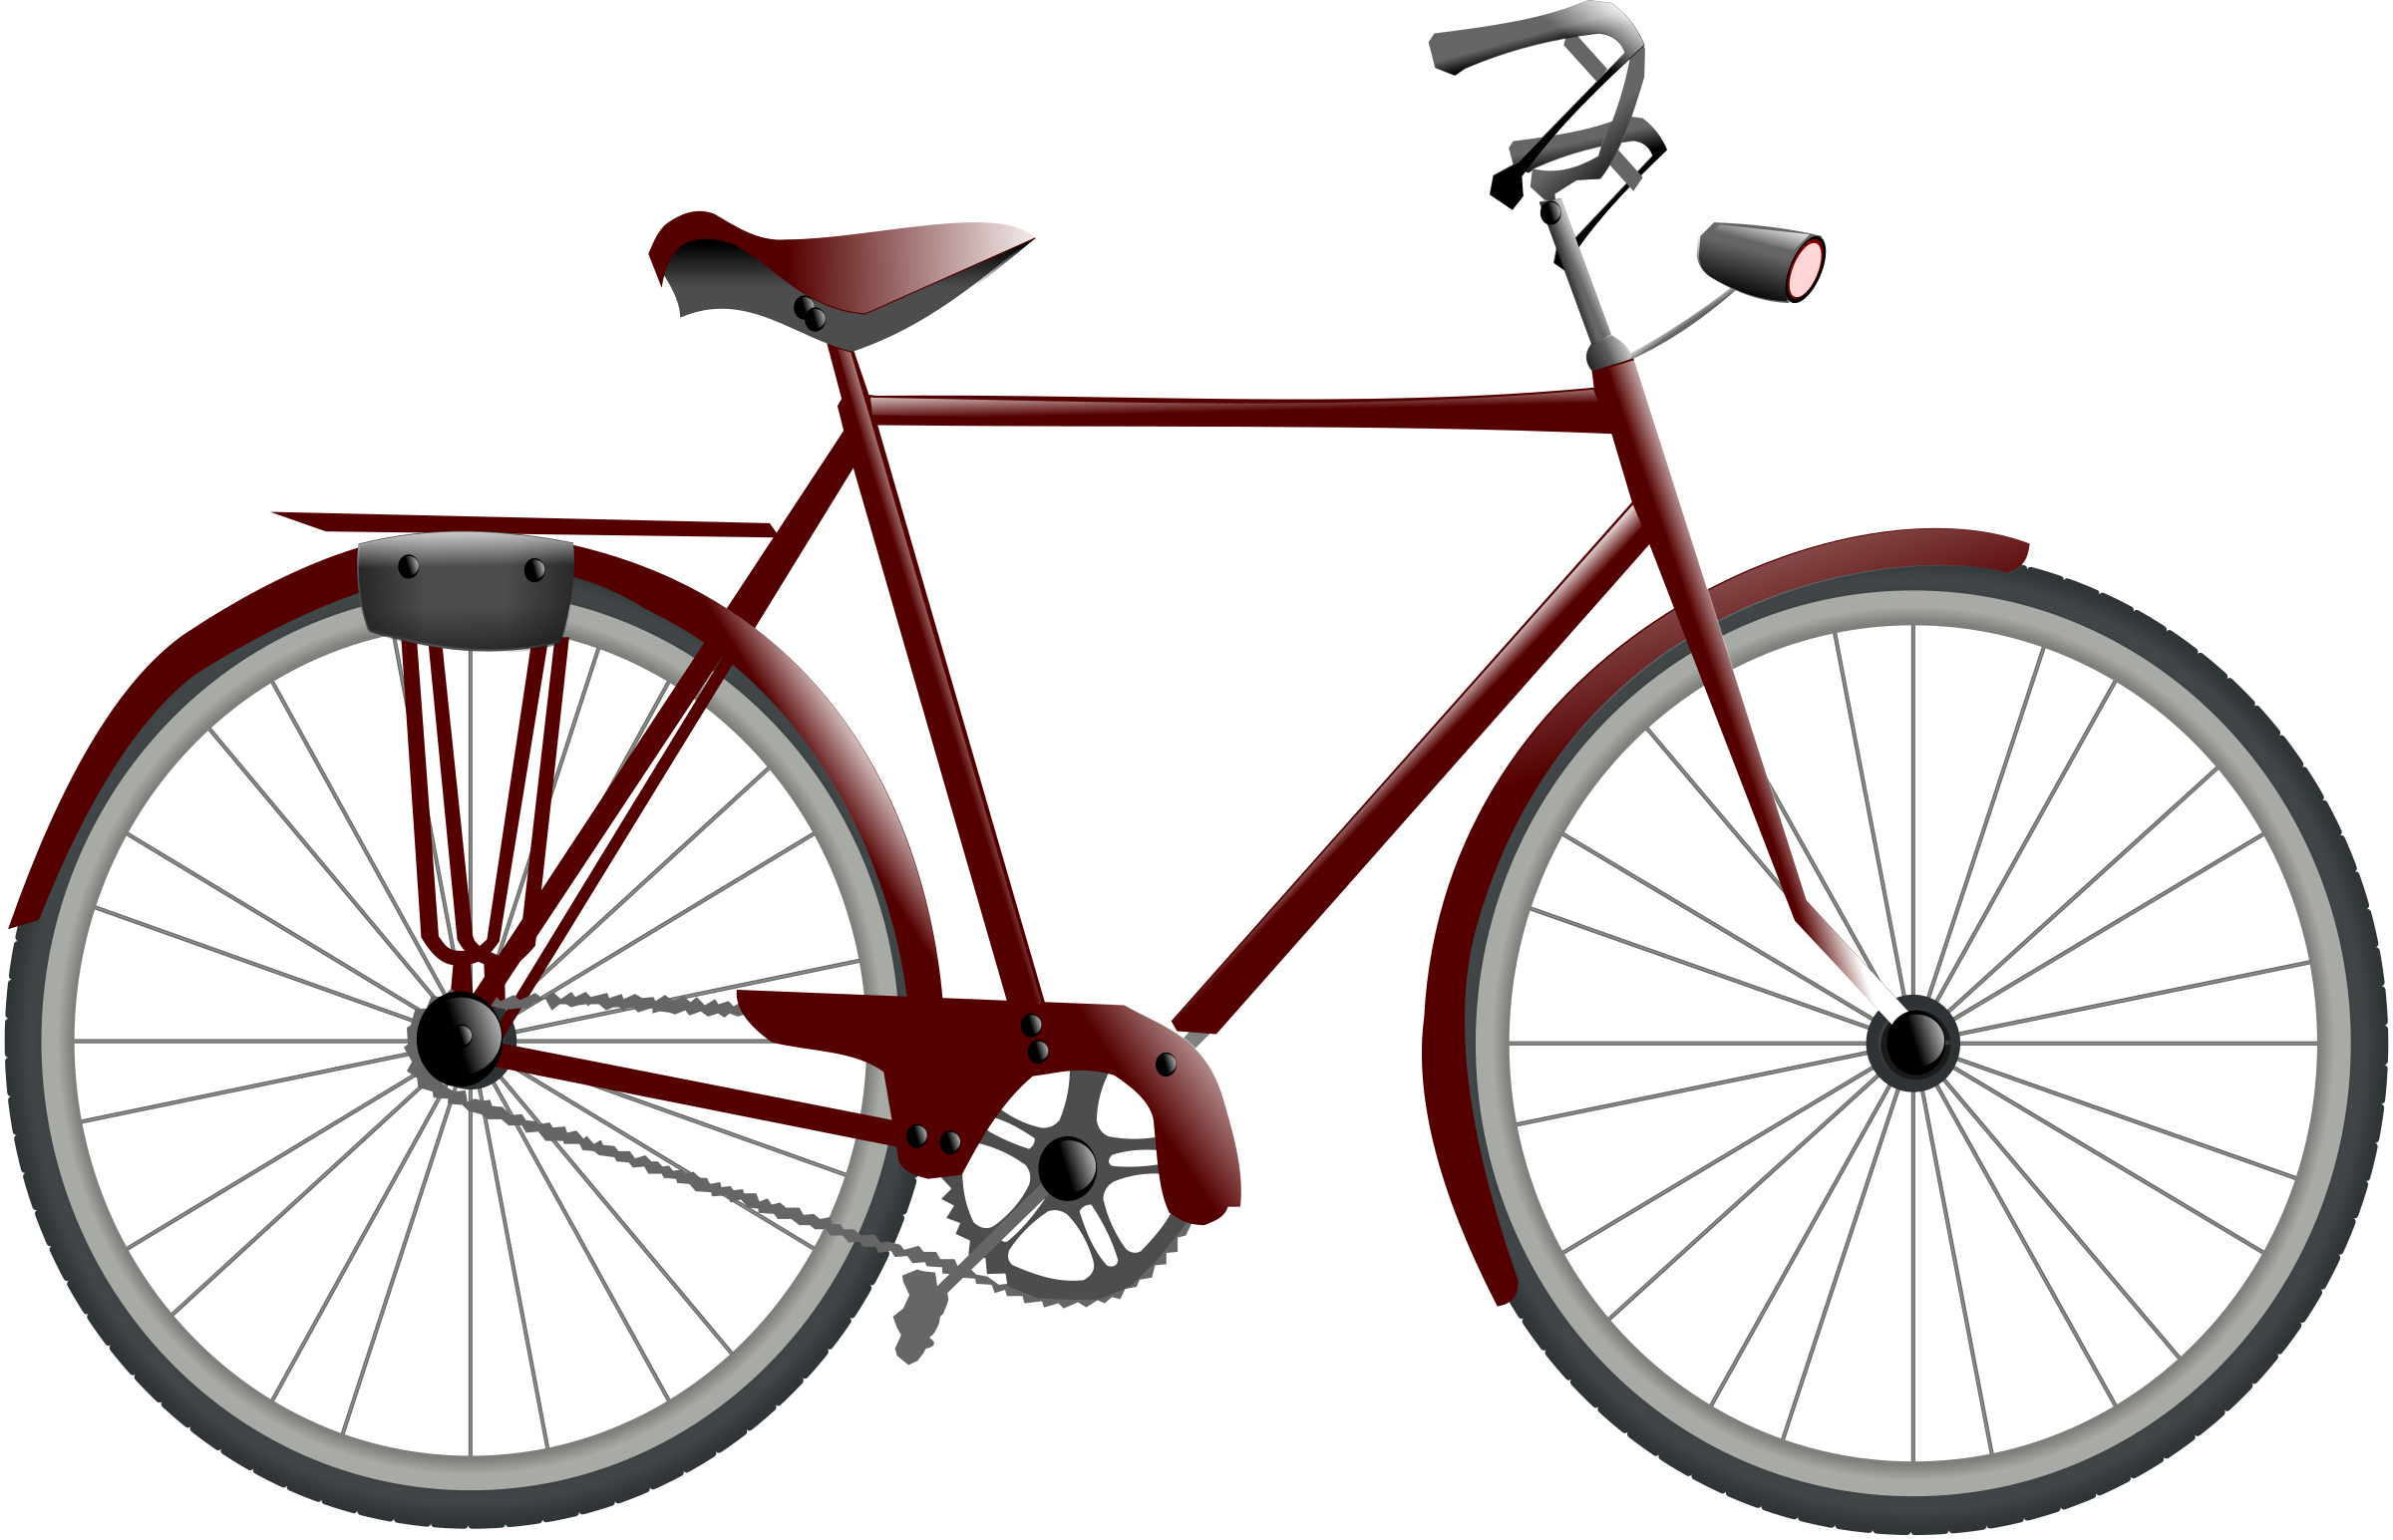 bicycle pictures clip art free - photo #6